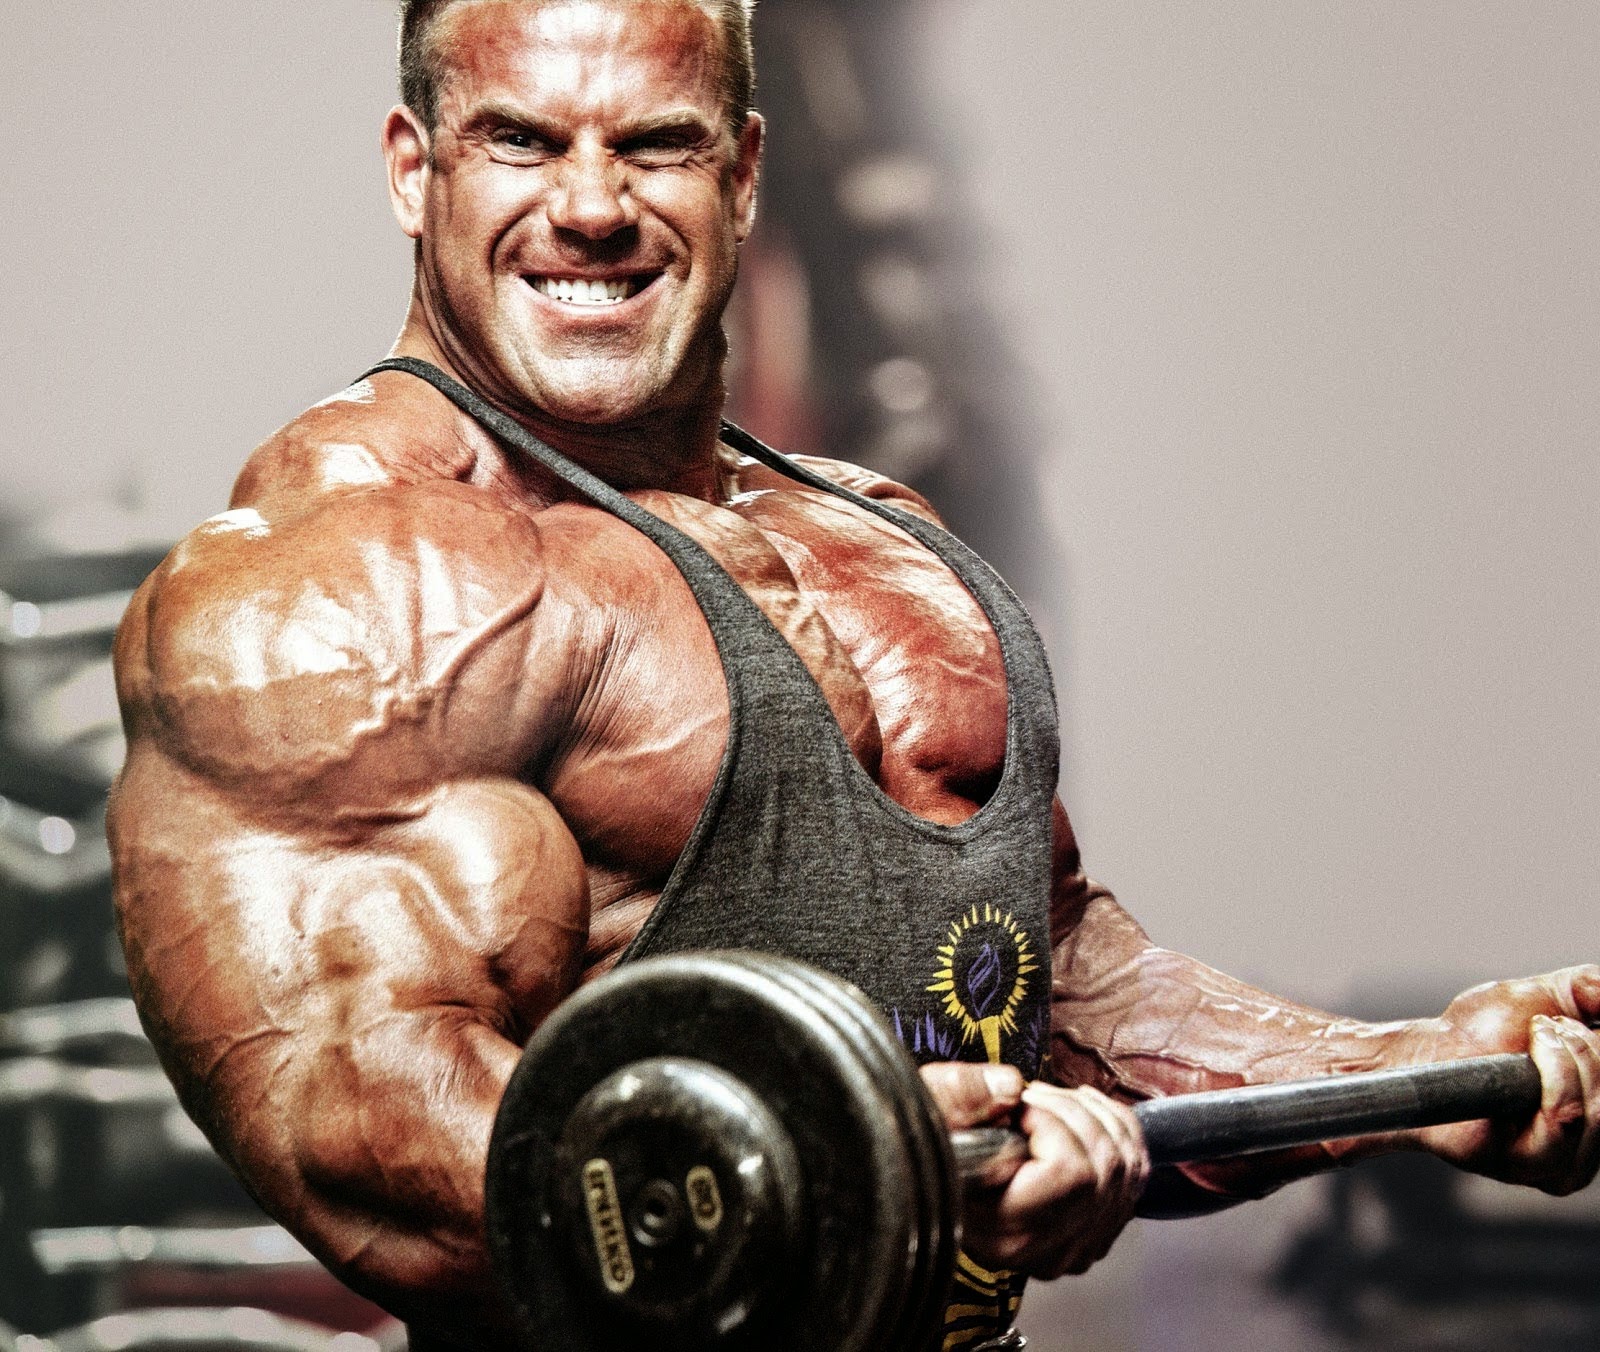  arm workout Images and Photos | bodybuilding wallpapers Free Download